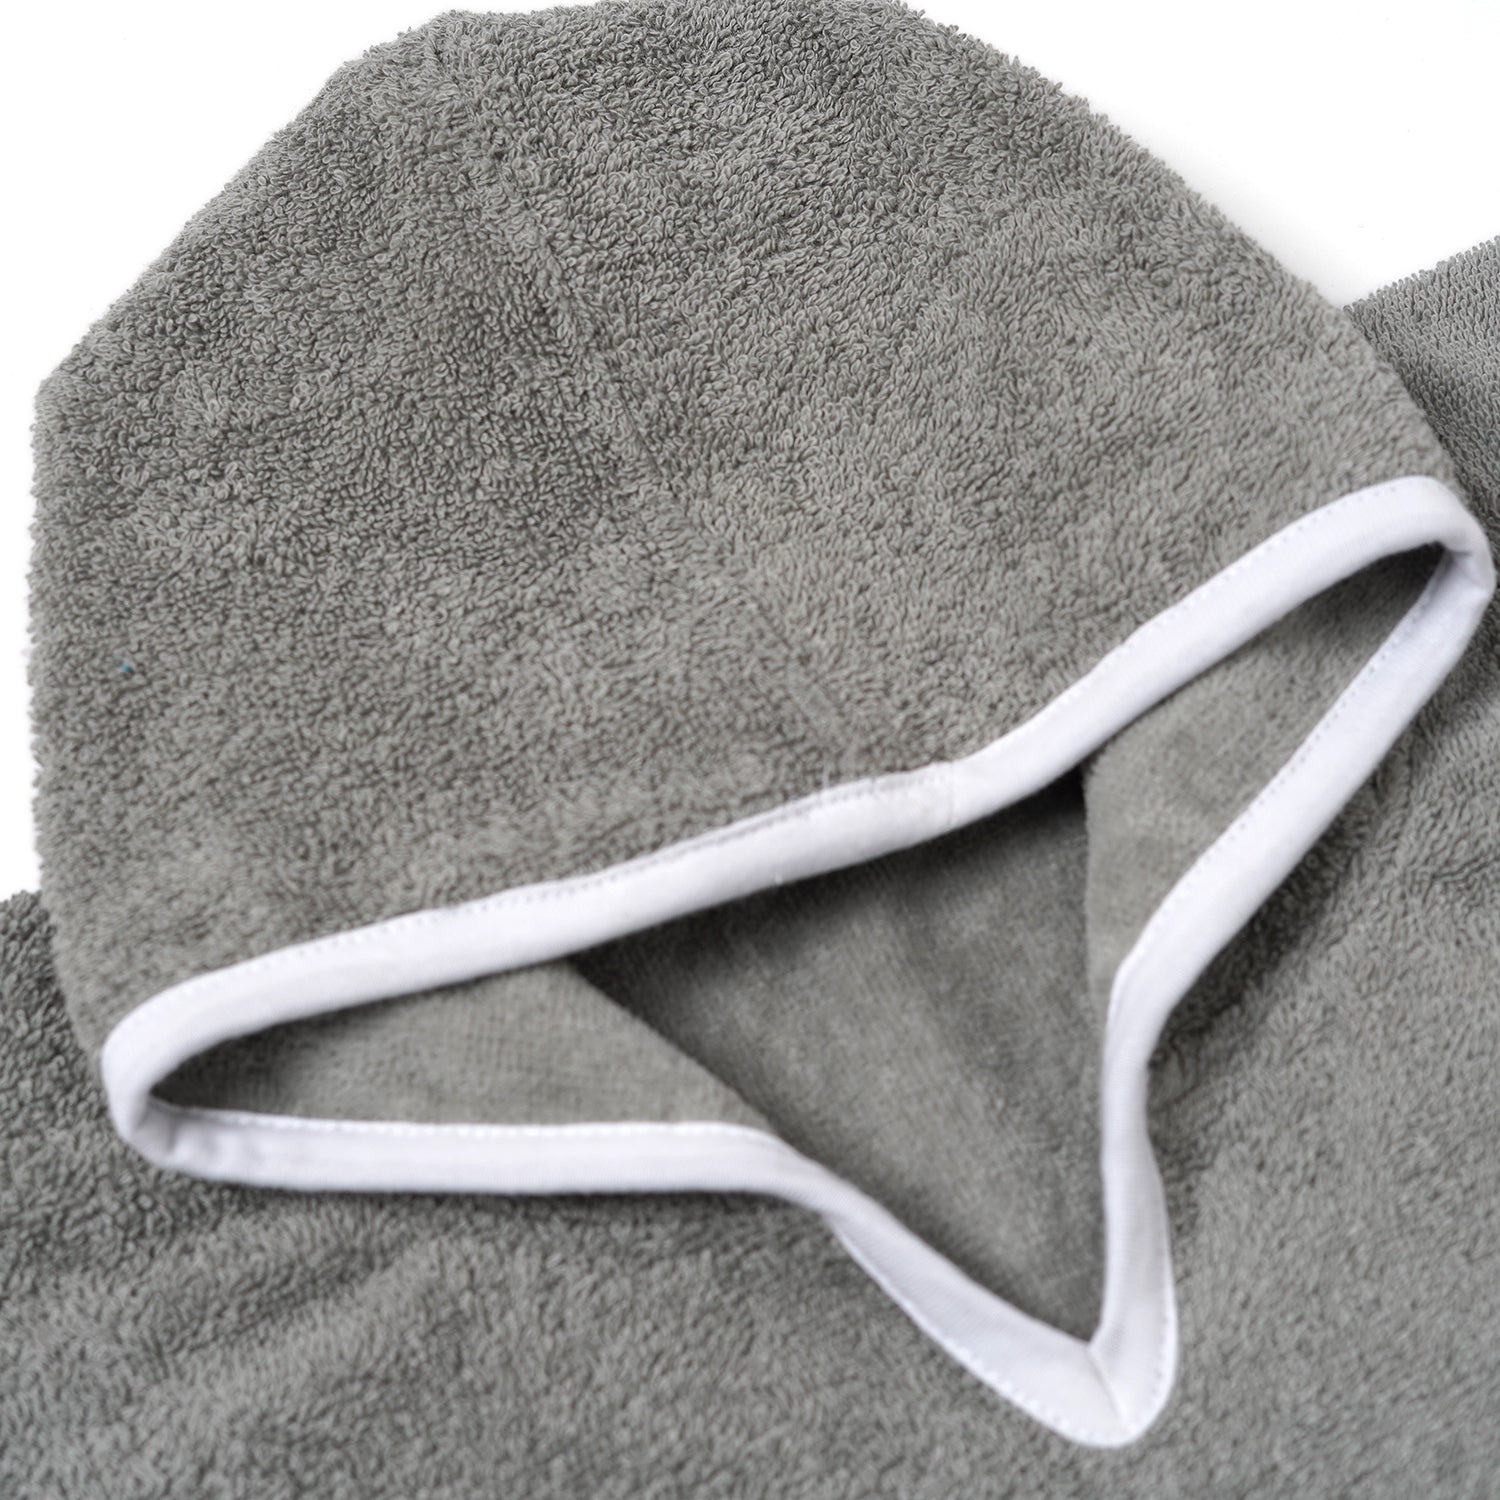 100% Cotton Woven Baby Poncho Towel Soft and Absorbent Hooded Towel (Grey)